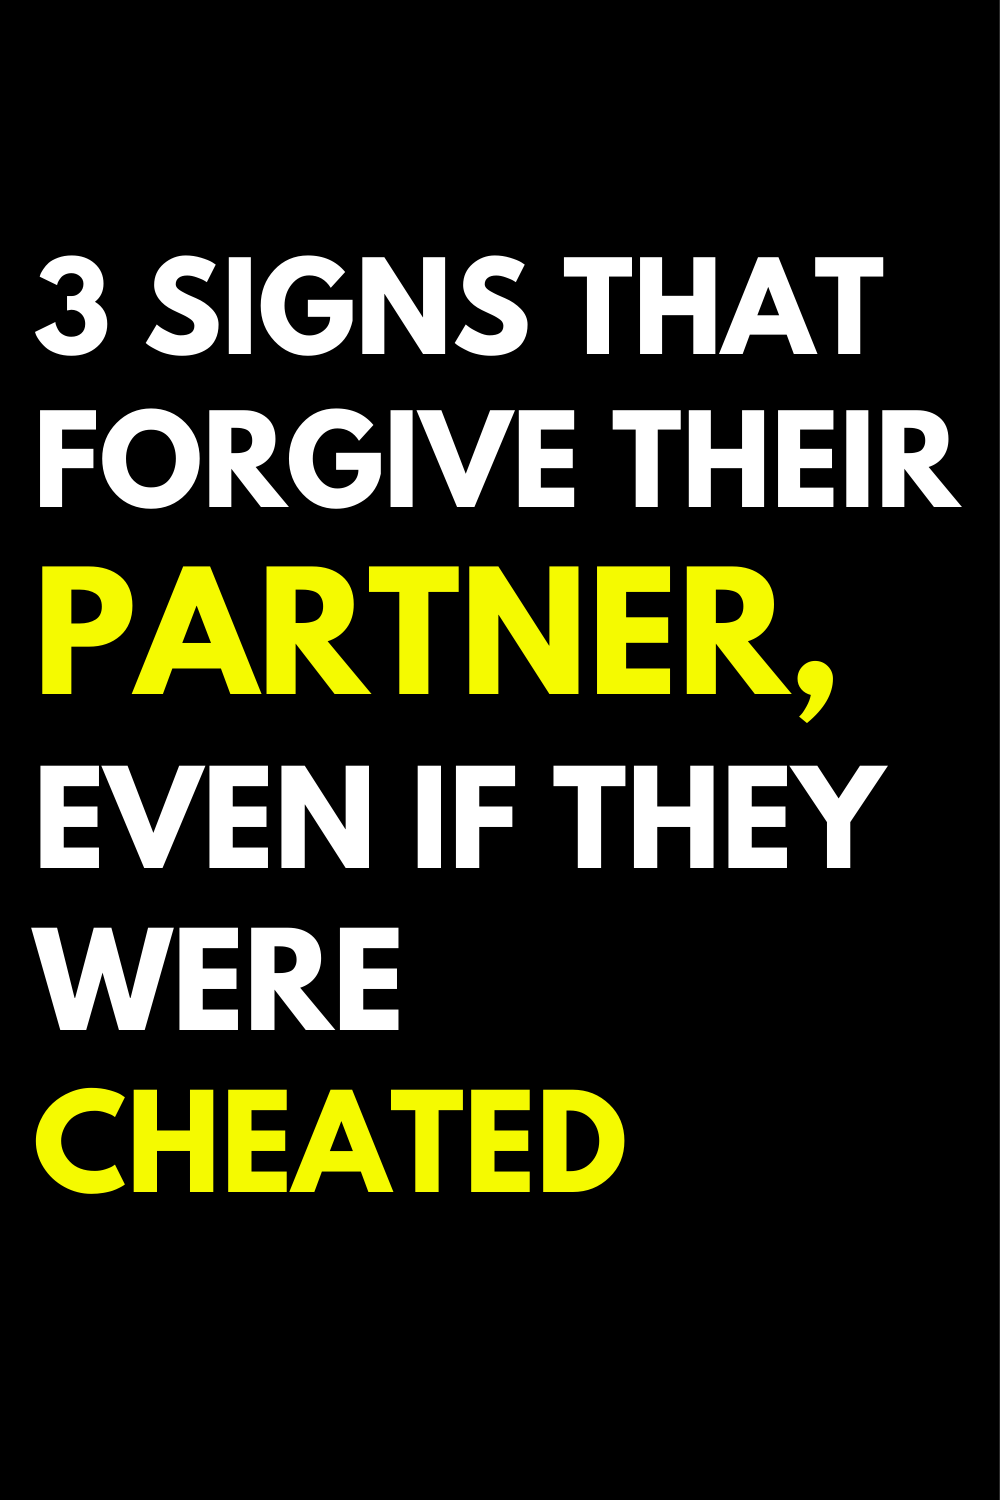 3 signs that forgive their partner, even if they were cheated